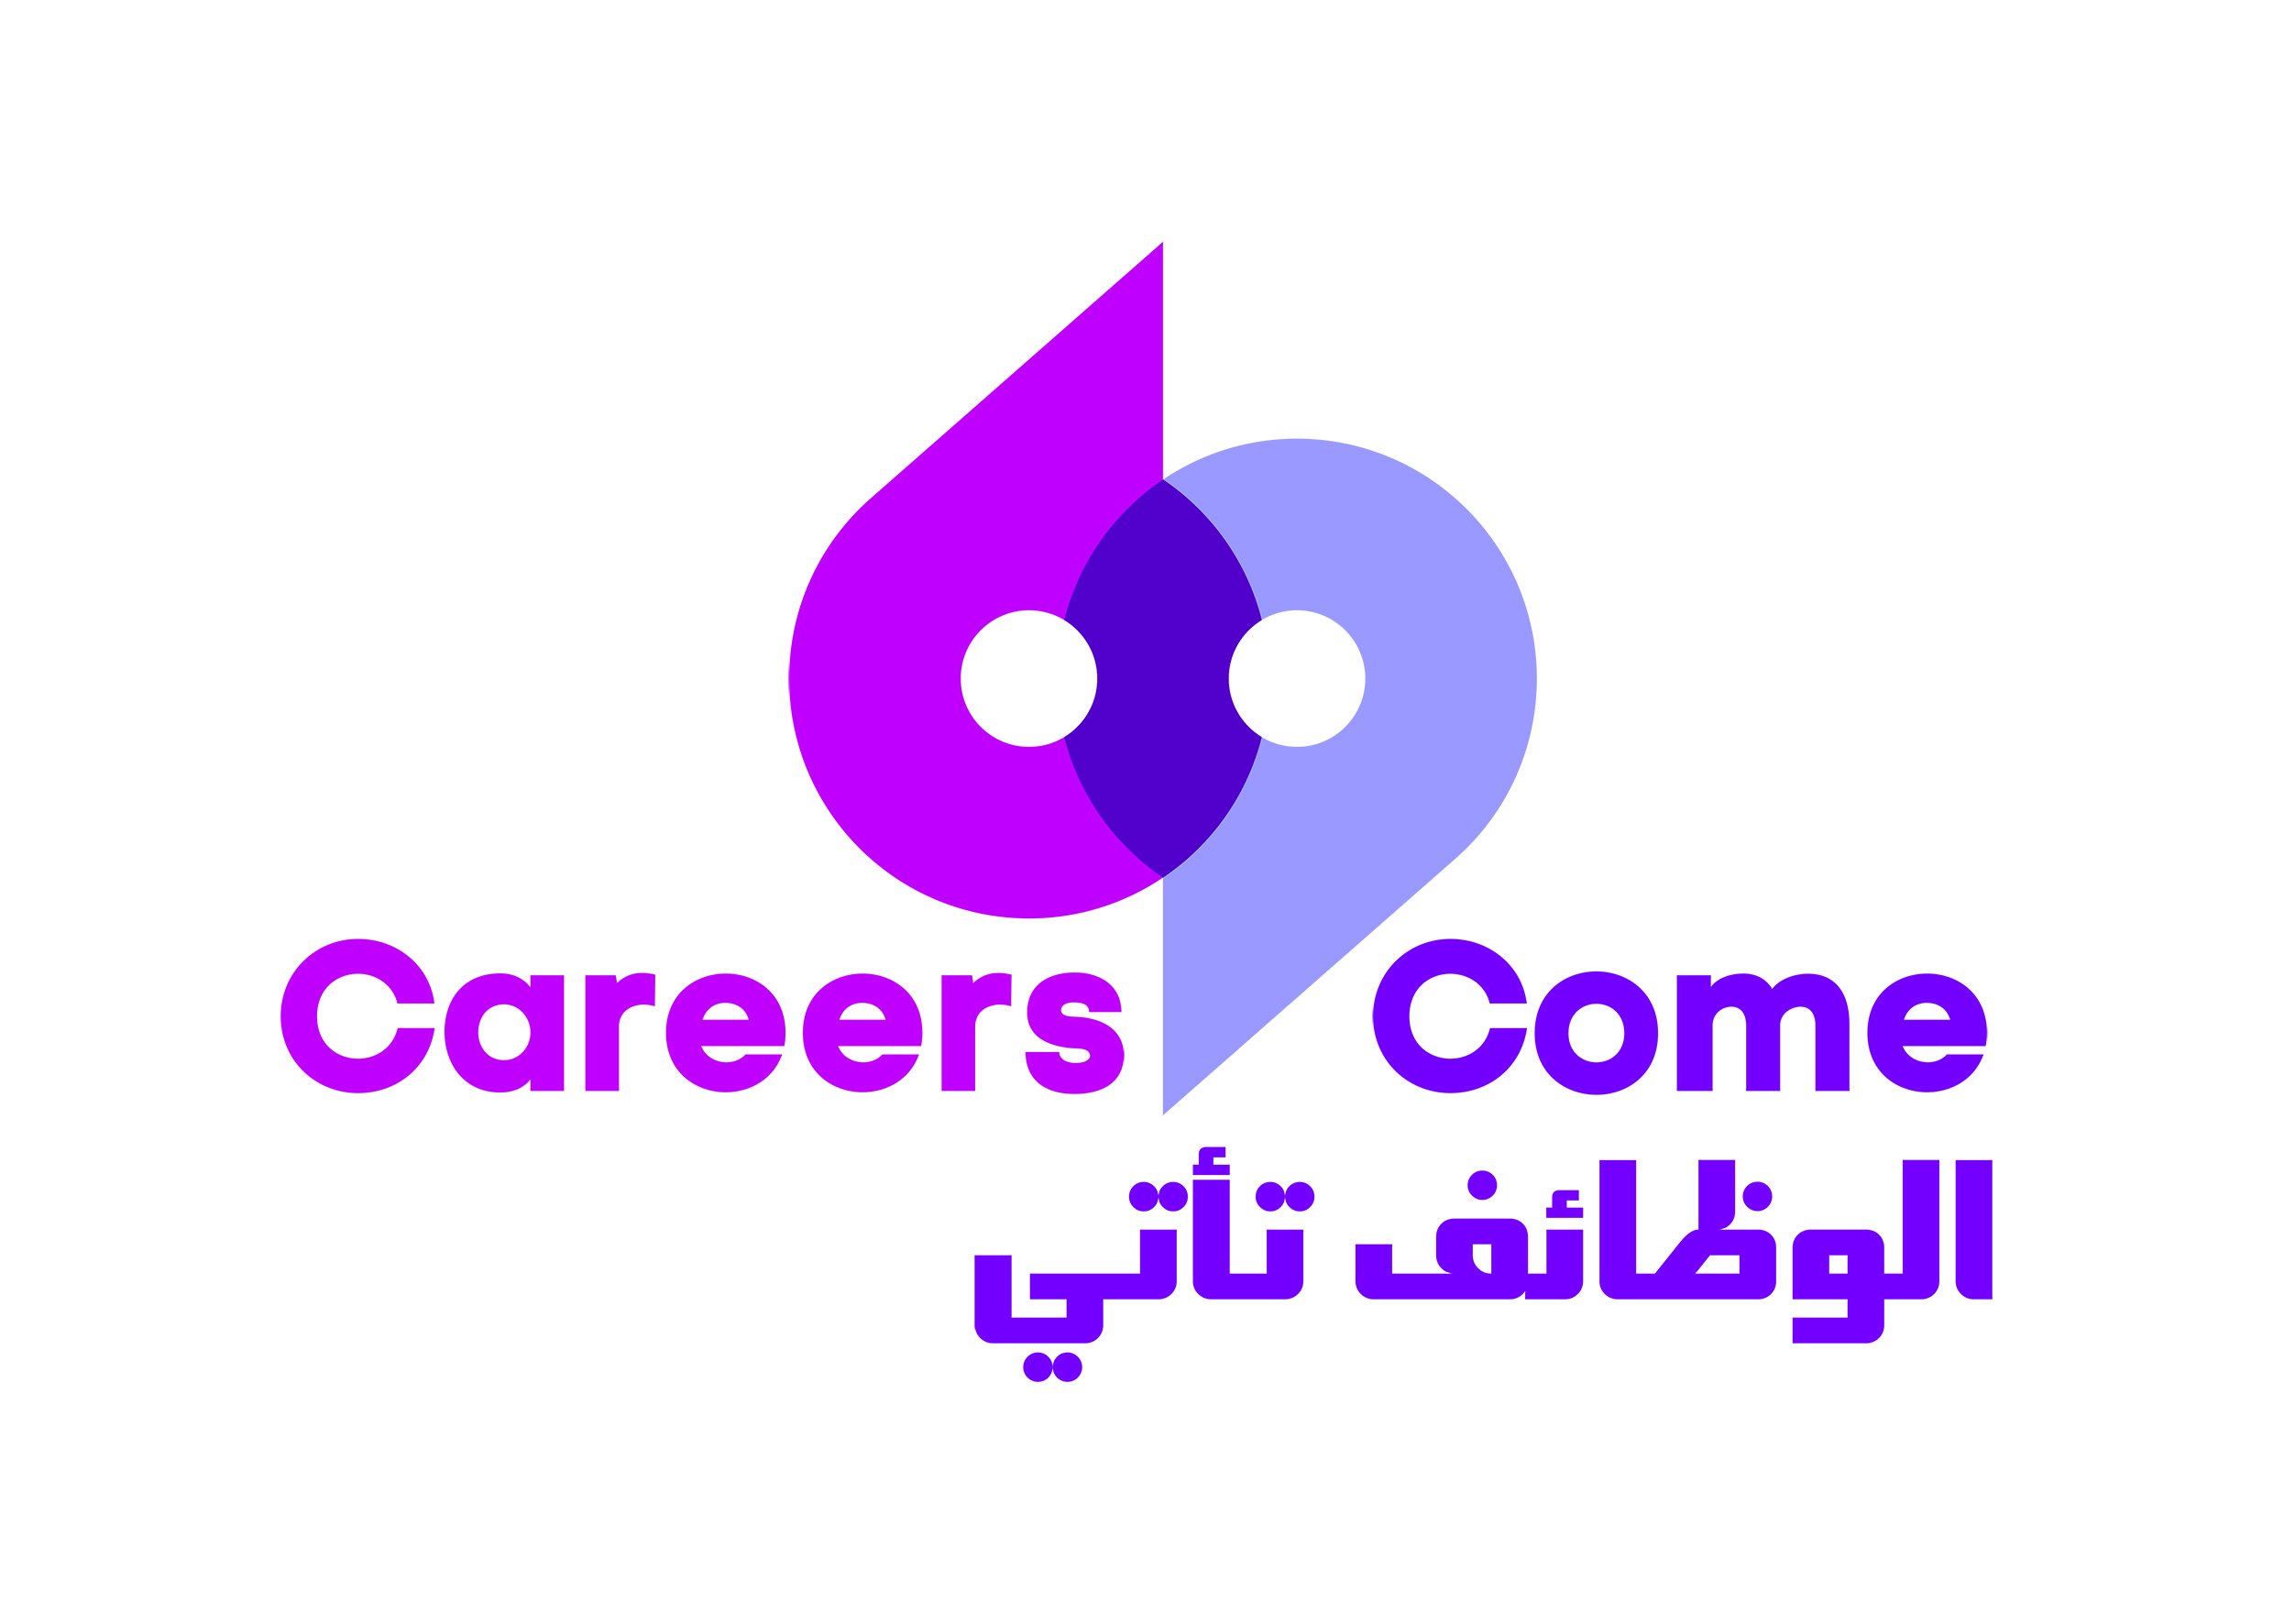 More about Careers Come